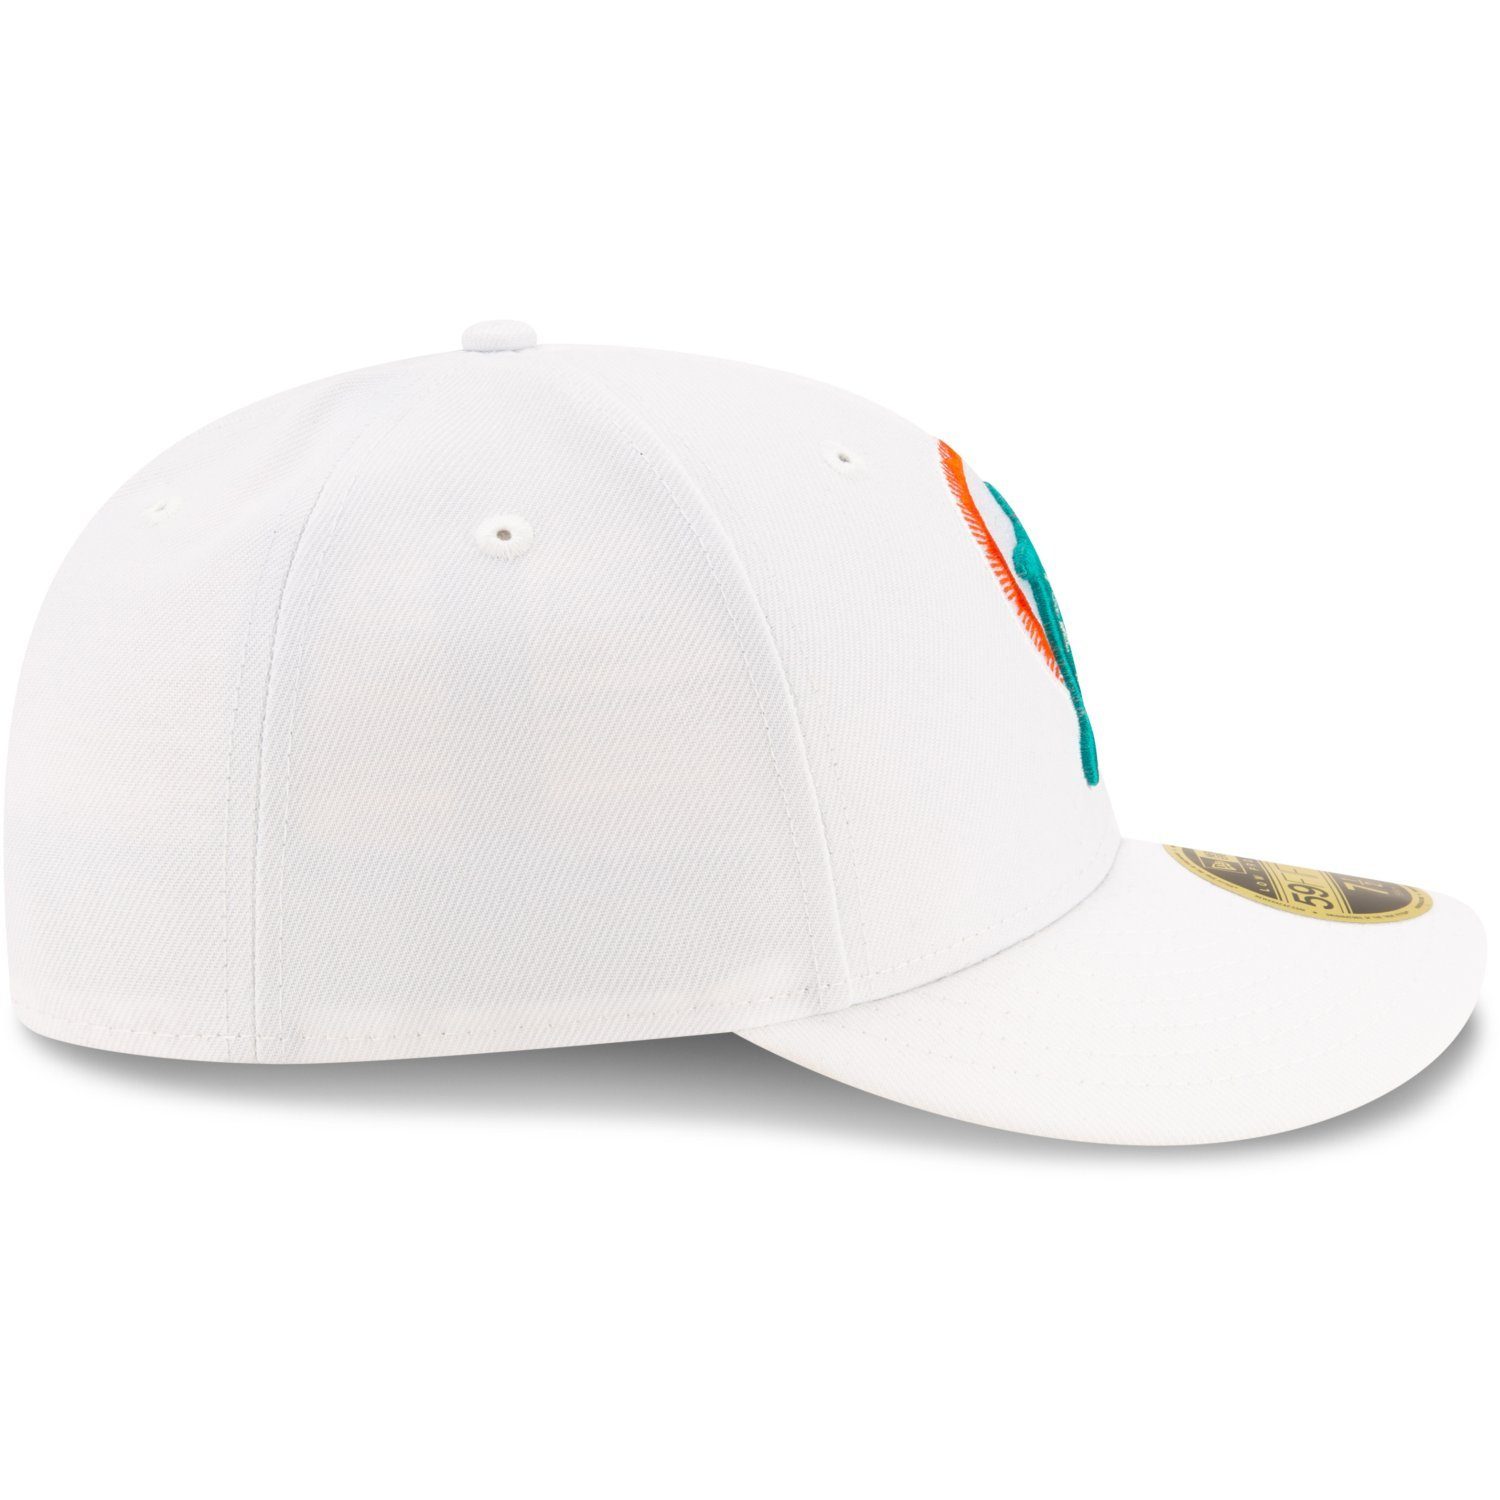 Cap Low Miami Dolphins RETRO Fitted Profile Era 59Fifty New